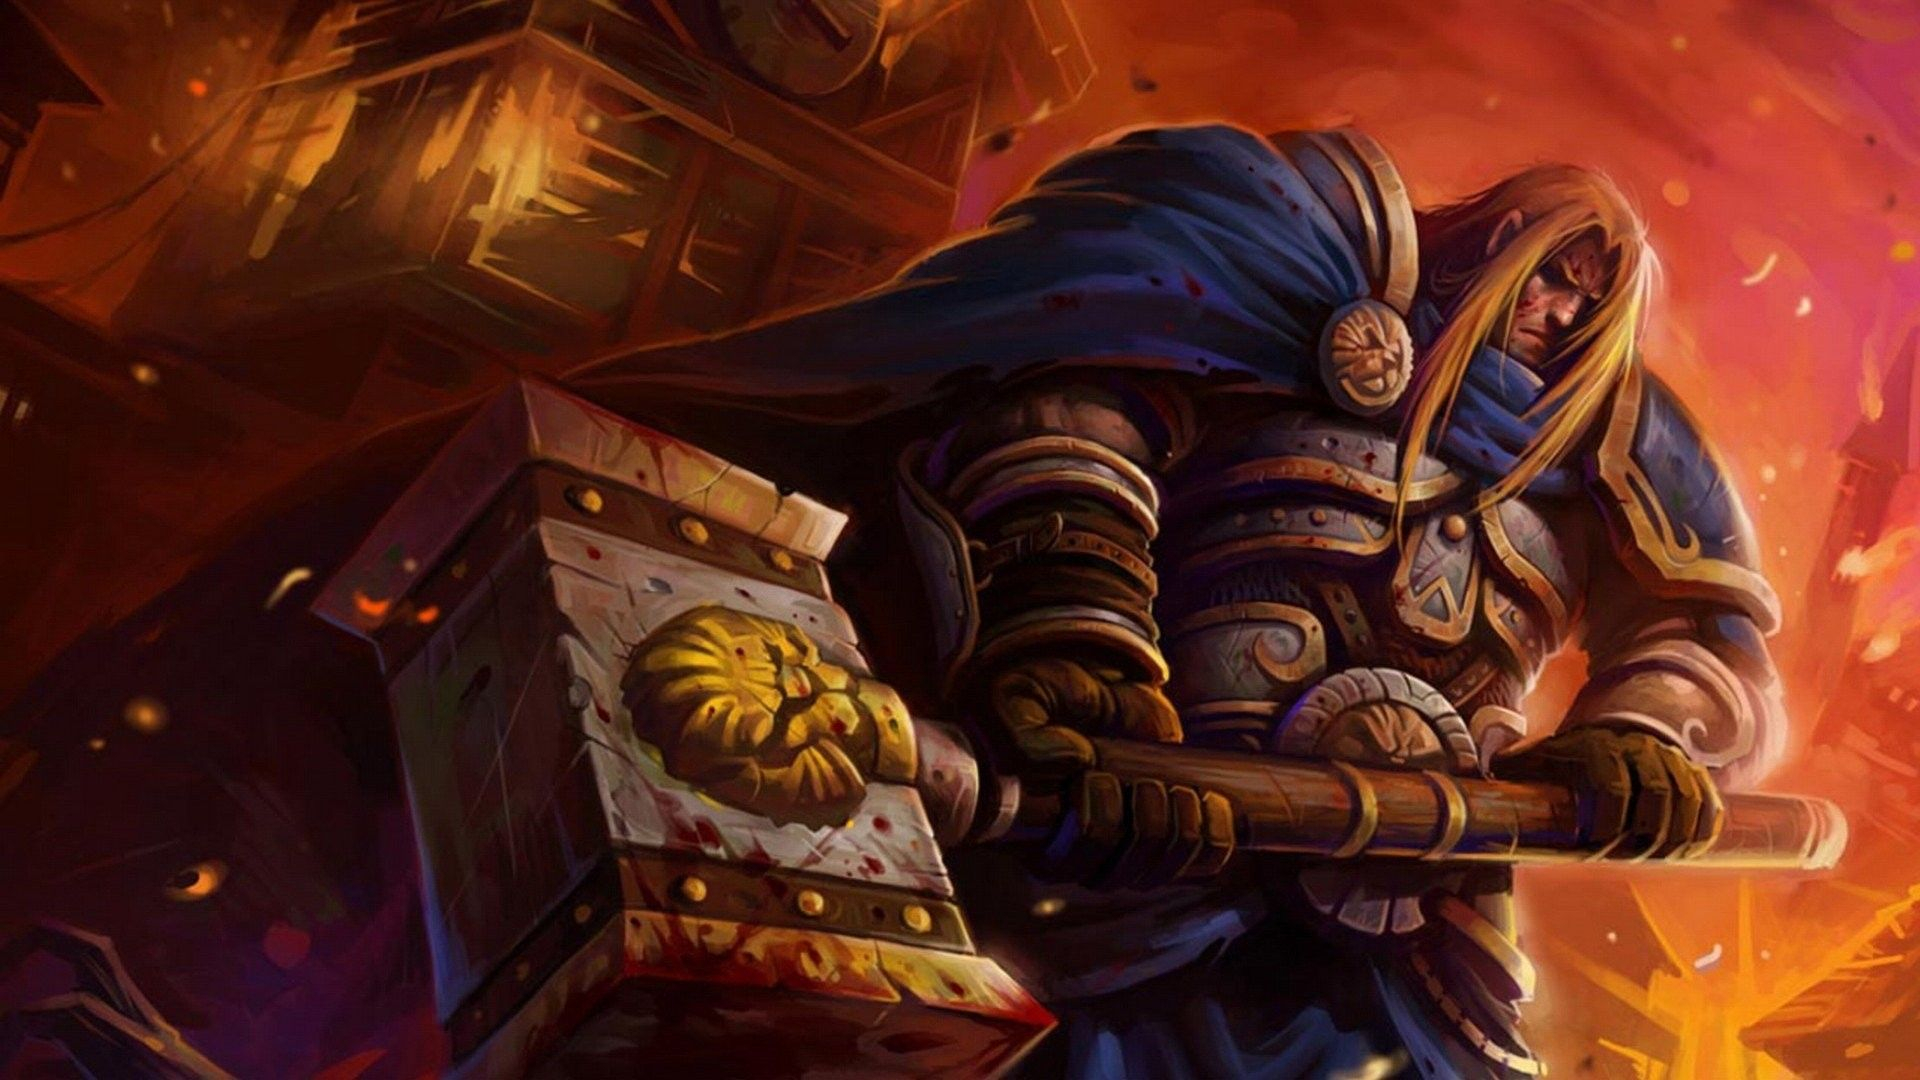 1920x1080 World of Warcraft Paladin Wallpapers Top Free World of Warcraft Paladin Backgrounds